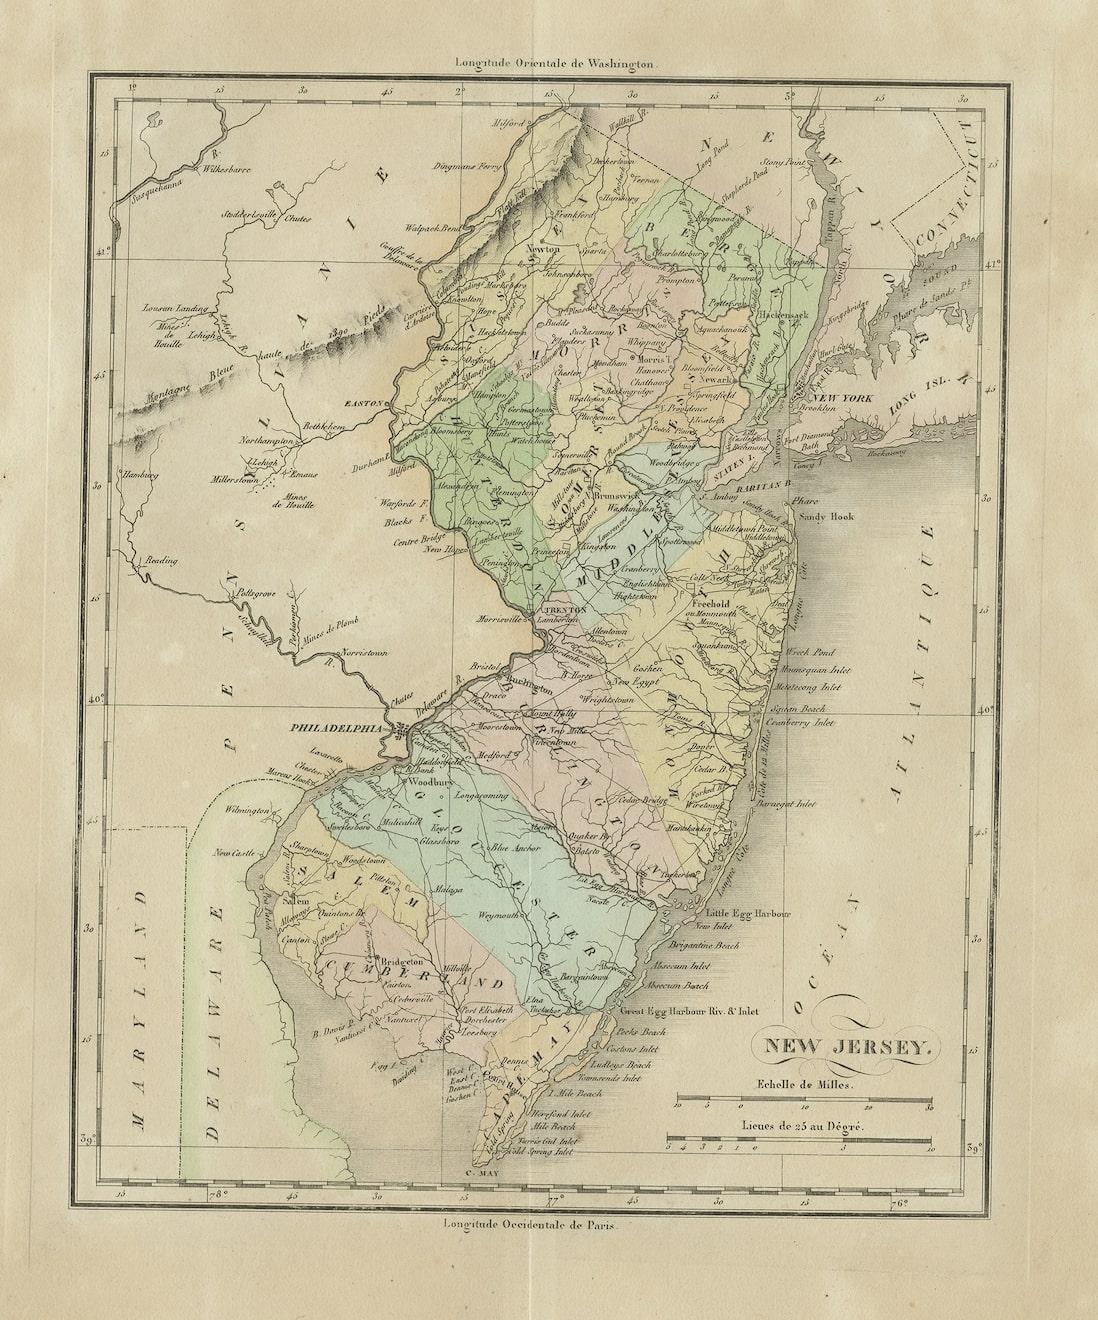 Original antique map titled 'Carte Géographique Statistique et Historique du New-Jersey'. One of the earliest obtainable maps of the State of New Jersey published outside of the United States. The map appeared in Buchon's edition of Carey & Lea's